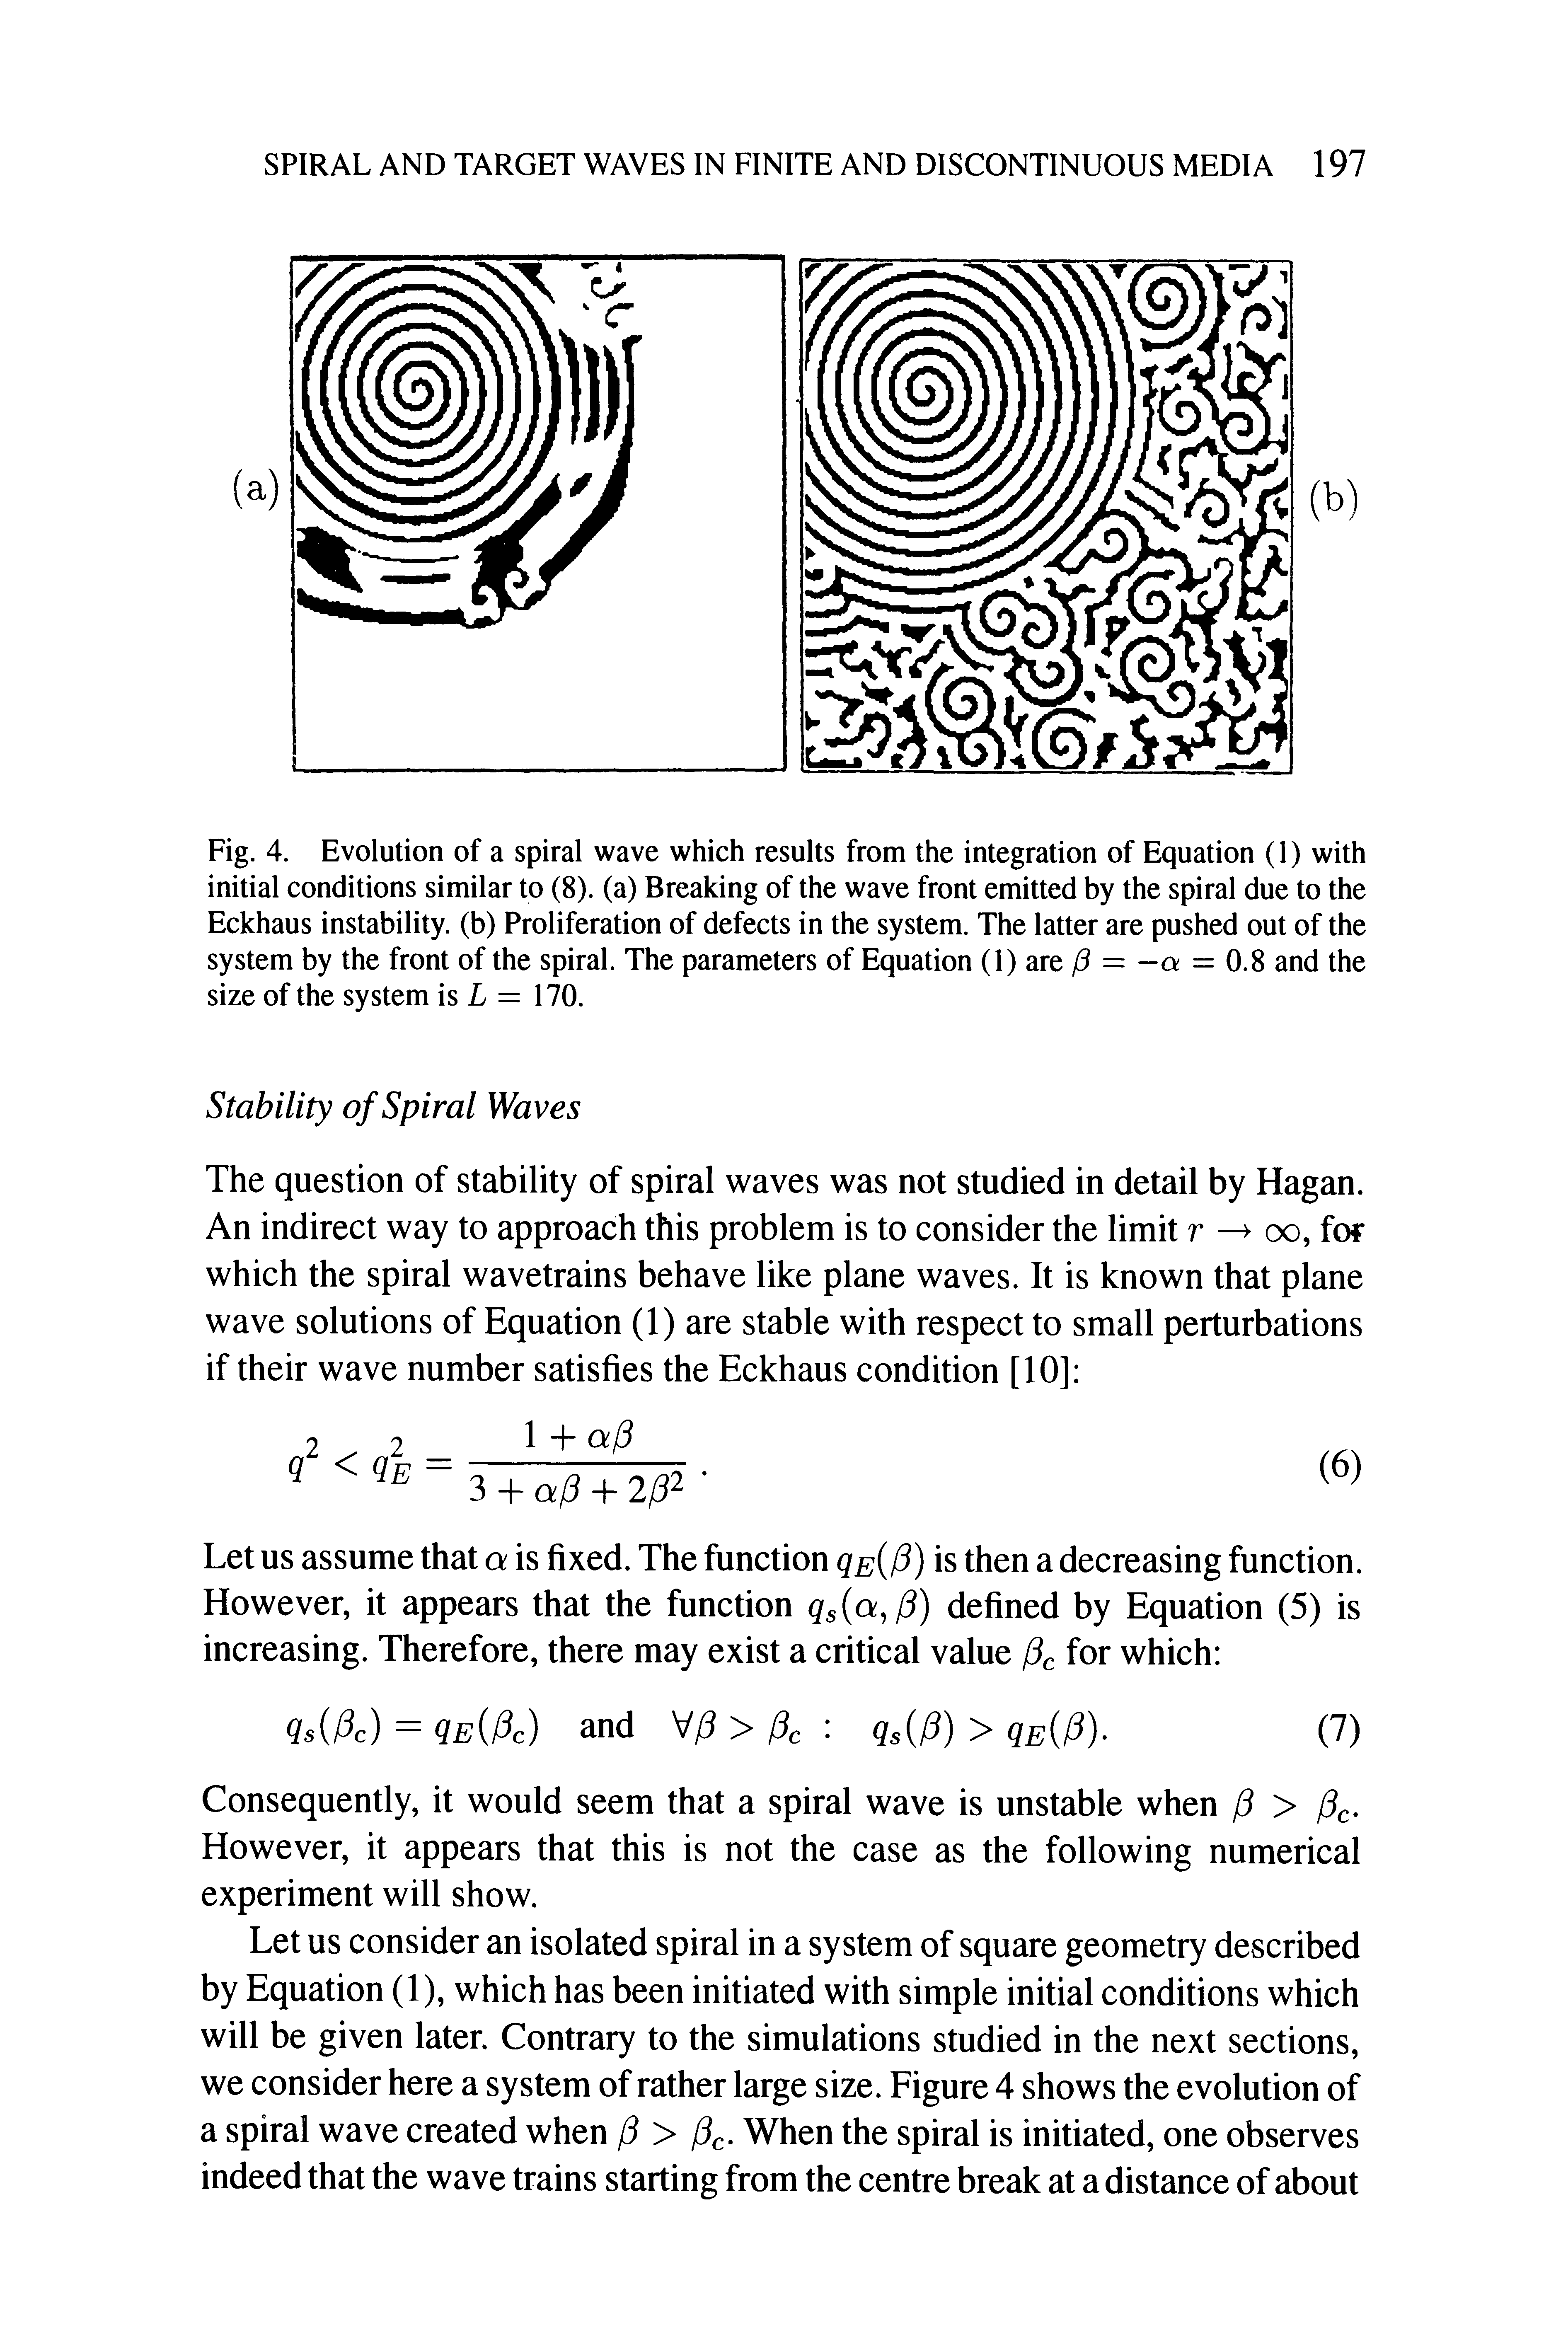 Fig. 4. Evolution of a spiral wave which results from the integration of Equation (1) with initial conditions similar to (8). (a) Breaking of the wave front emitted by the spiral due to the Eckhaus instability, (b) Proliferation of defects in the system. The latter are pushed out of the system by the front of the spiral. The parameters of Equation (1) are fi — -a = 0.8 and the size of the system is L = 170.